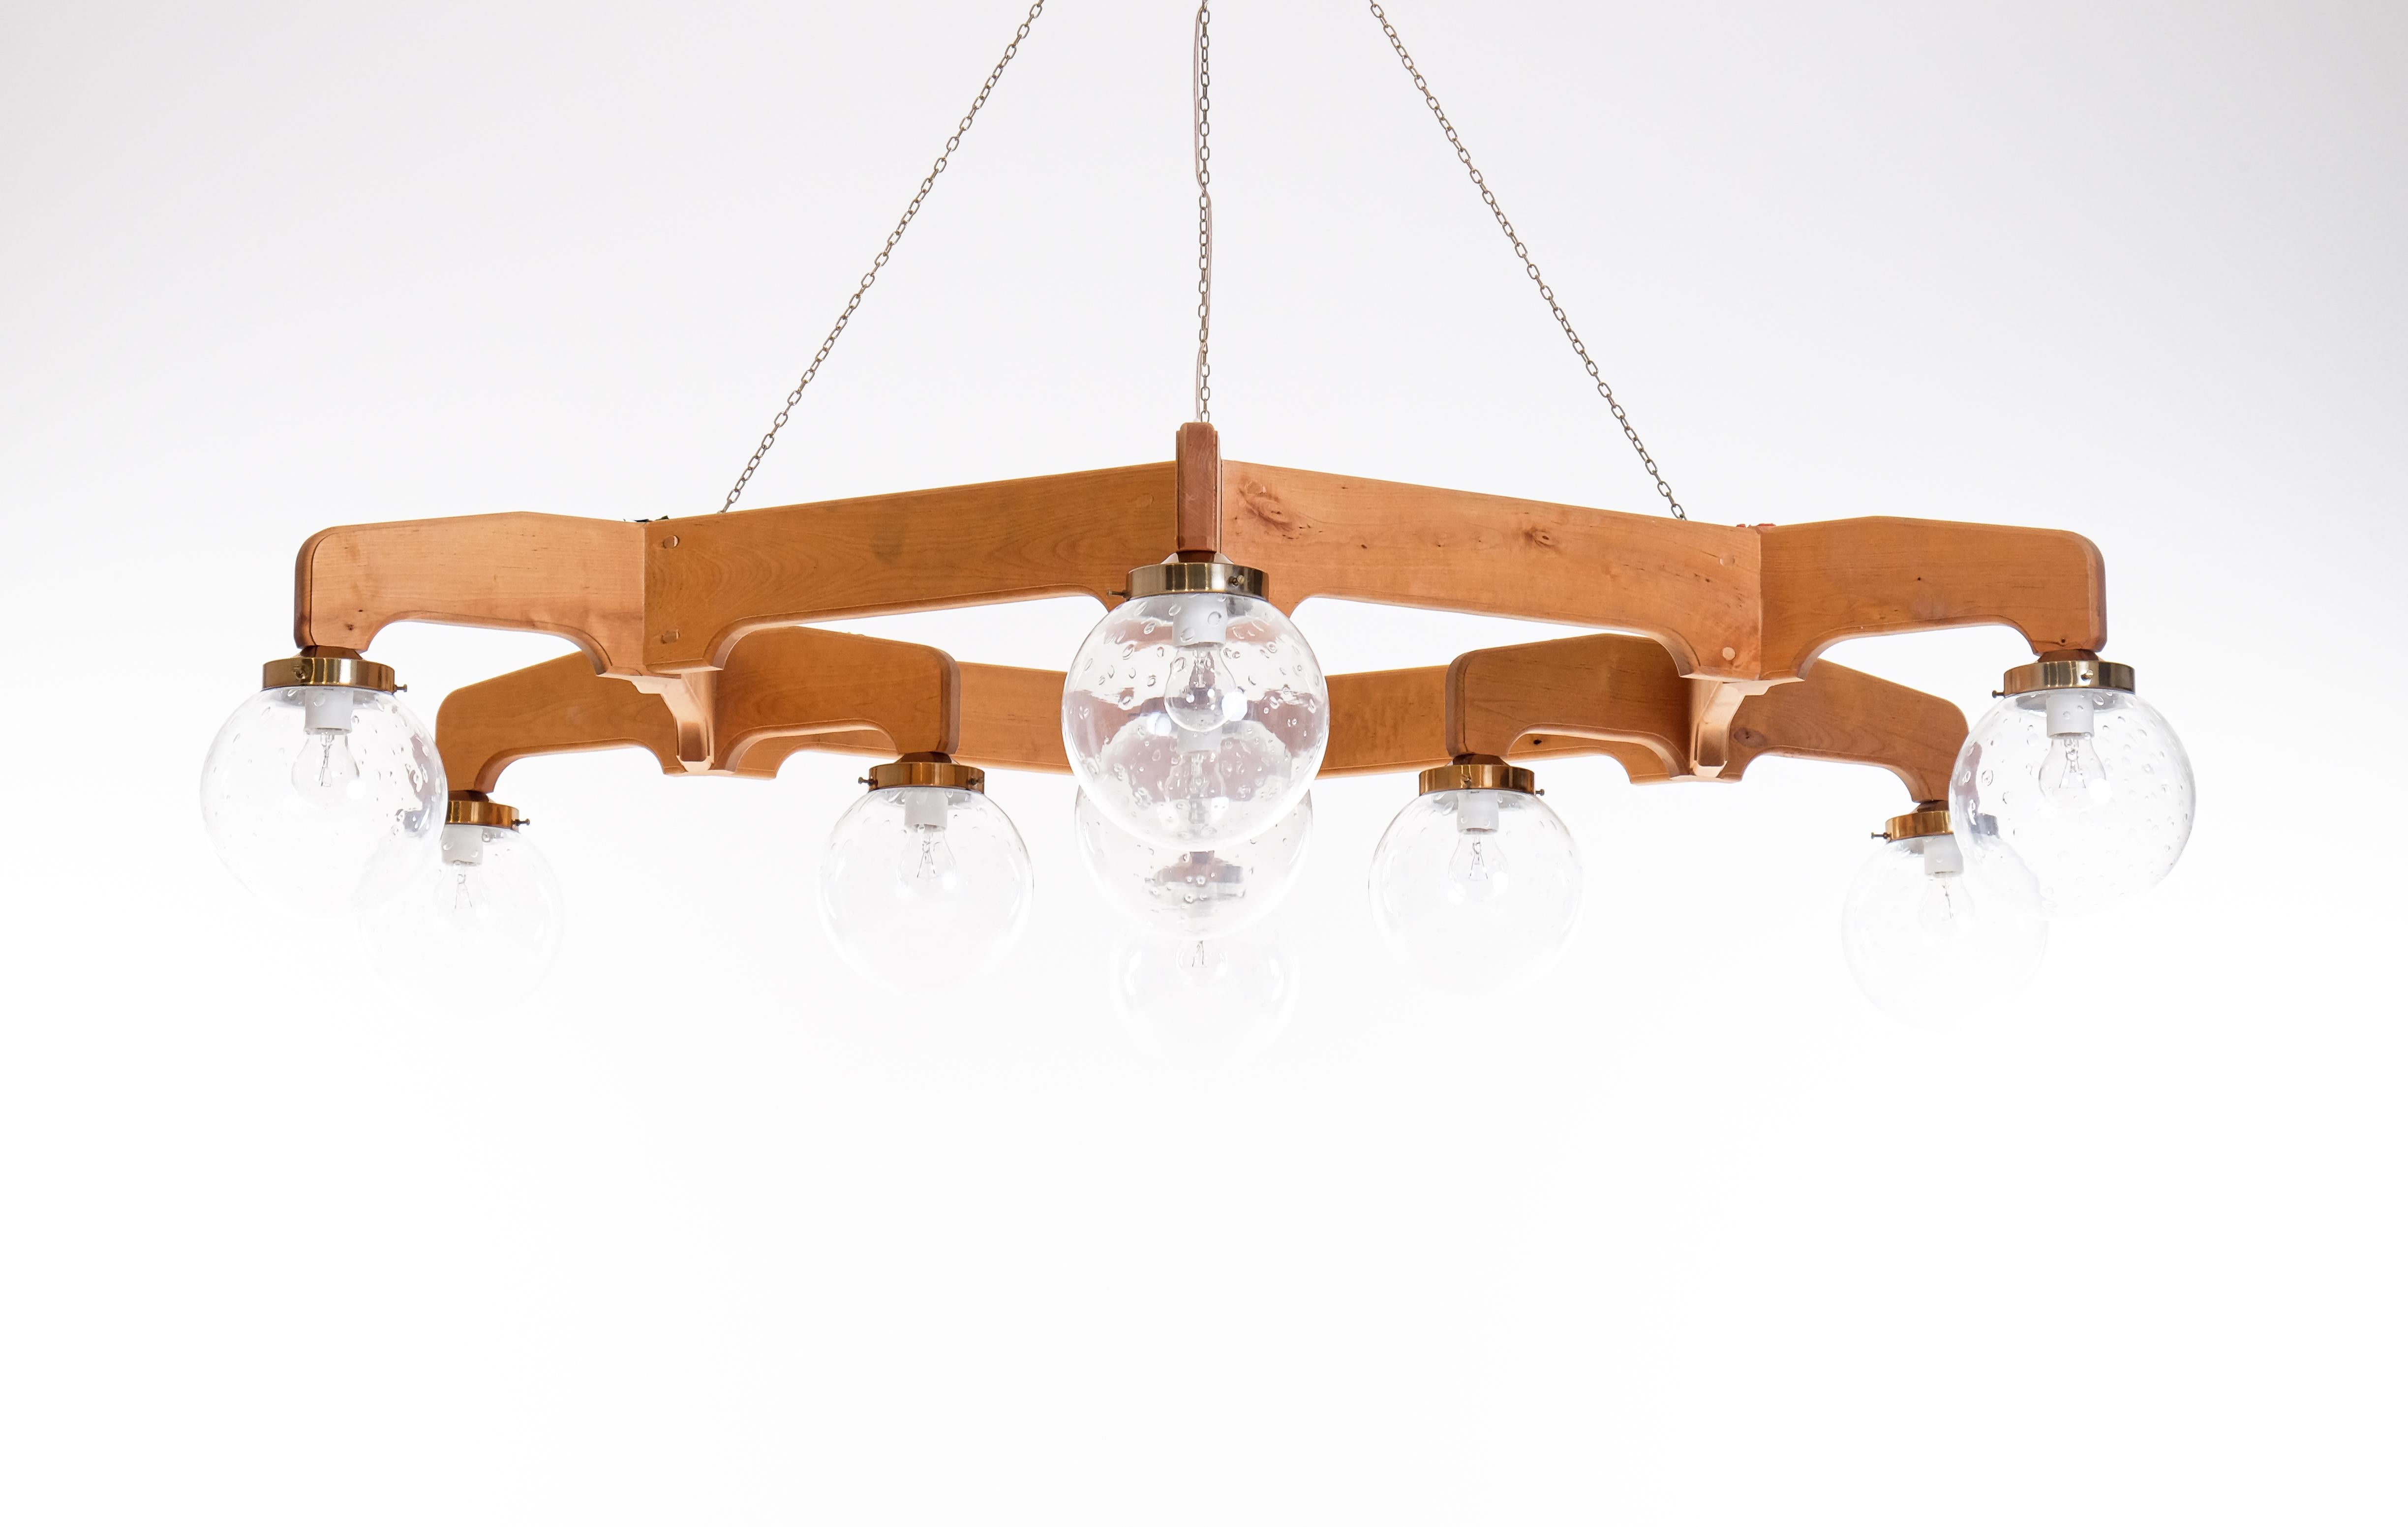 Set of 4 custom-made Swedish chandeliers in pine and glass. Diameter: 185 cm
Produced in Sweden during the 1970s. The chandeliers hang from metal wires and the height can easily be adjusted according to your wishes.
Please note: listed price is for